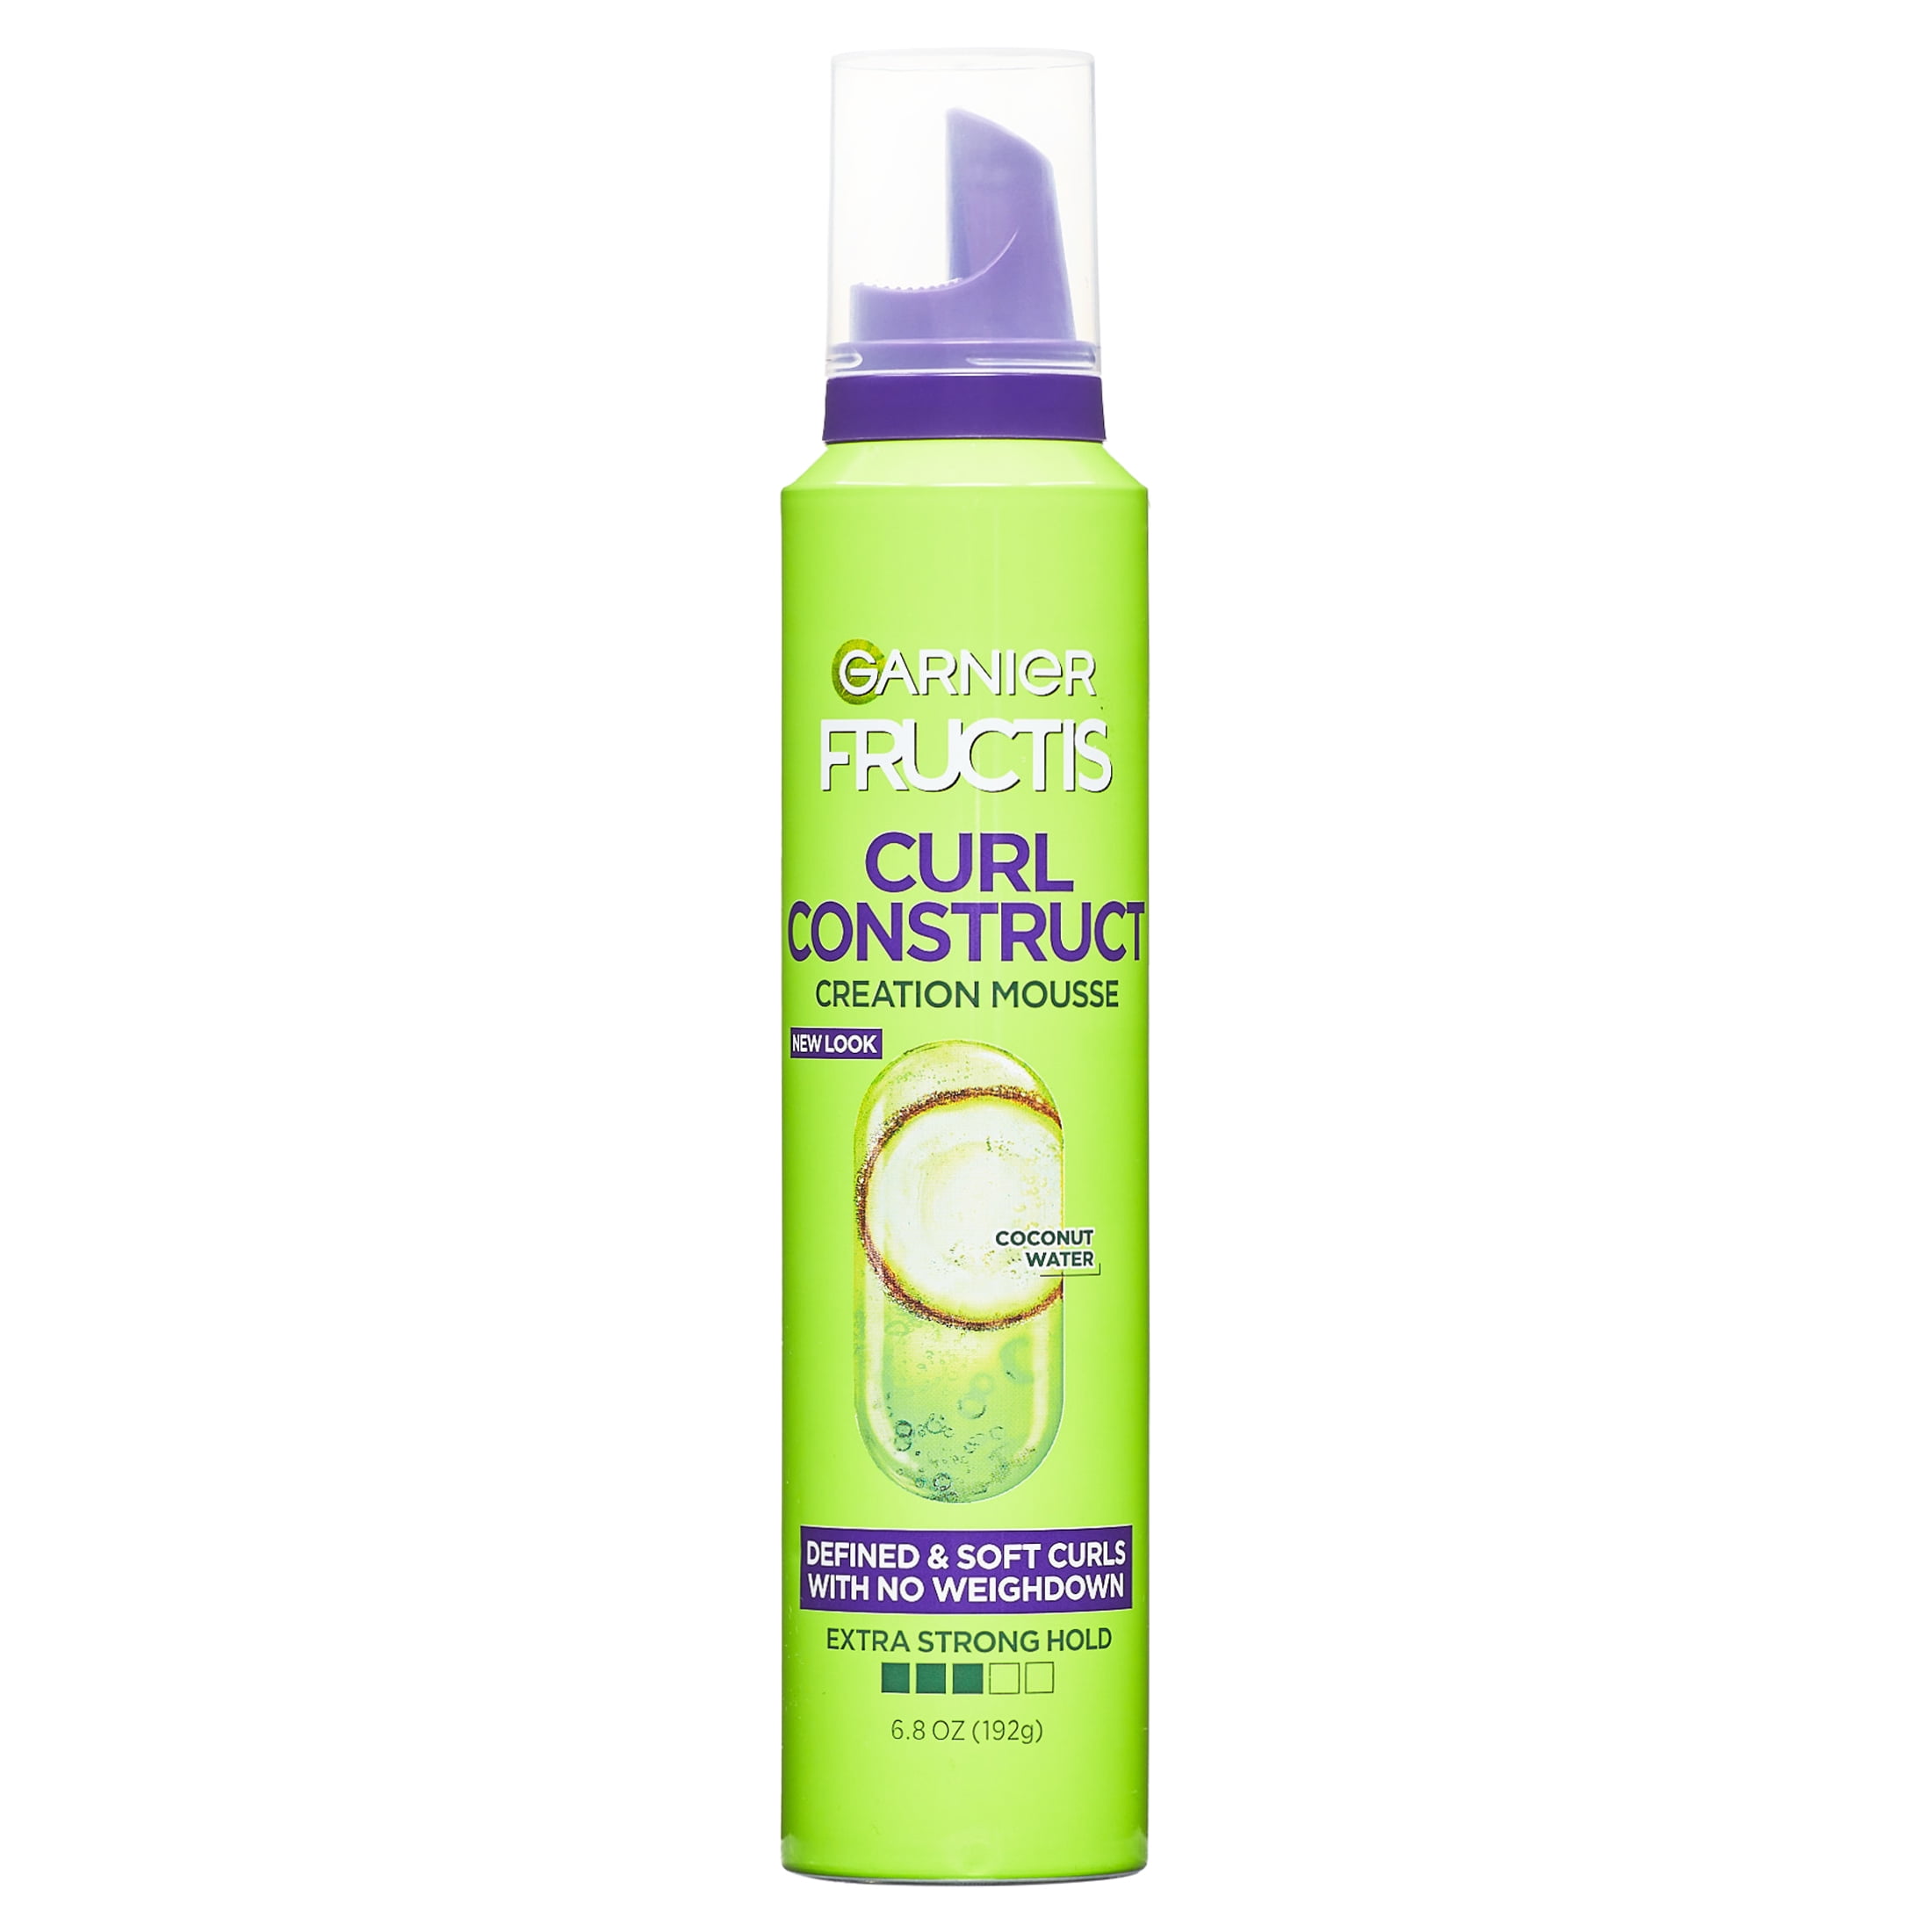 Garnier Fructis Style Curl Construct Creation Mousse, For Curly Hair, 6.8  oz